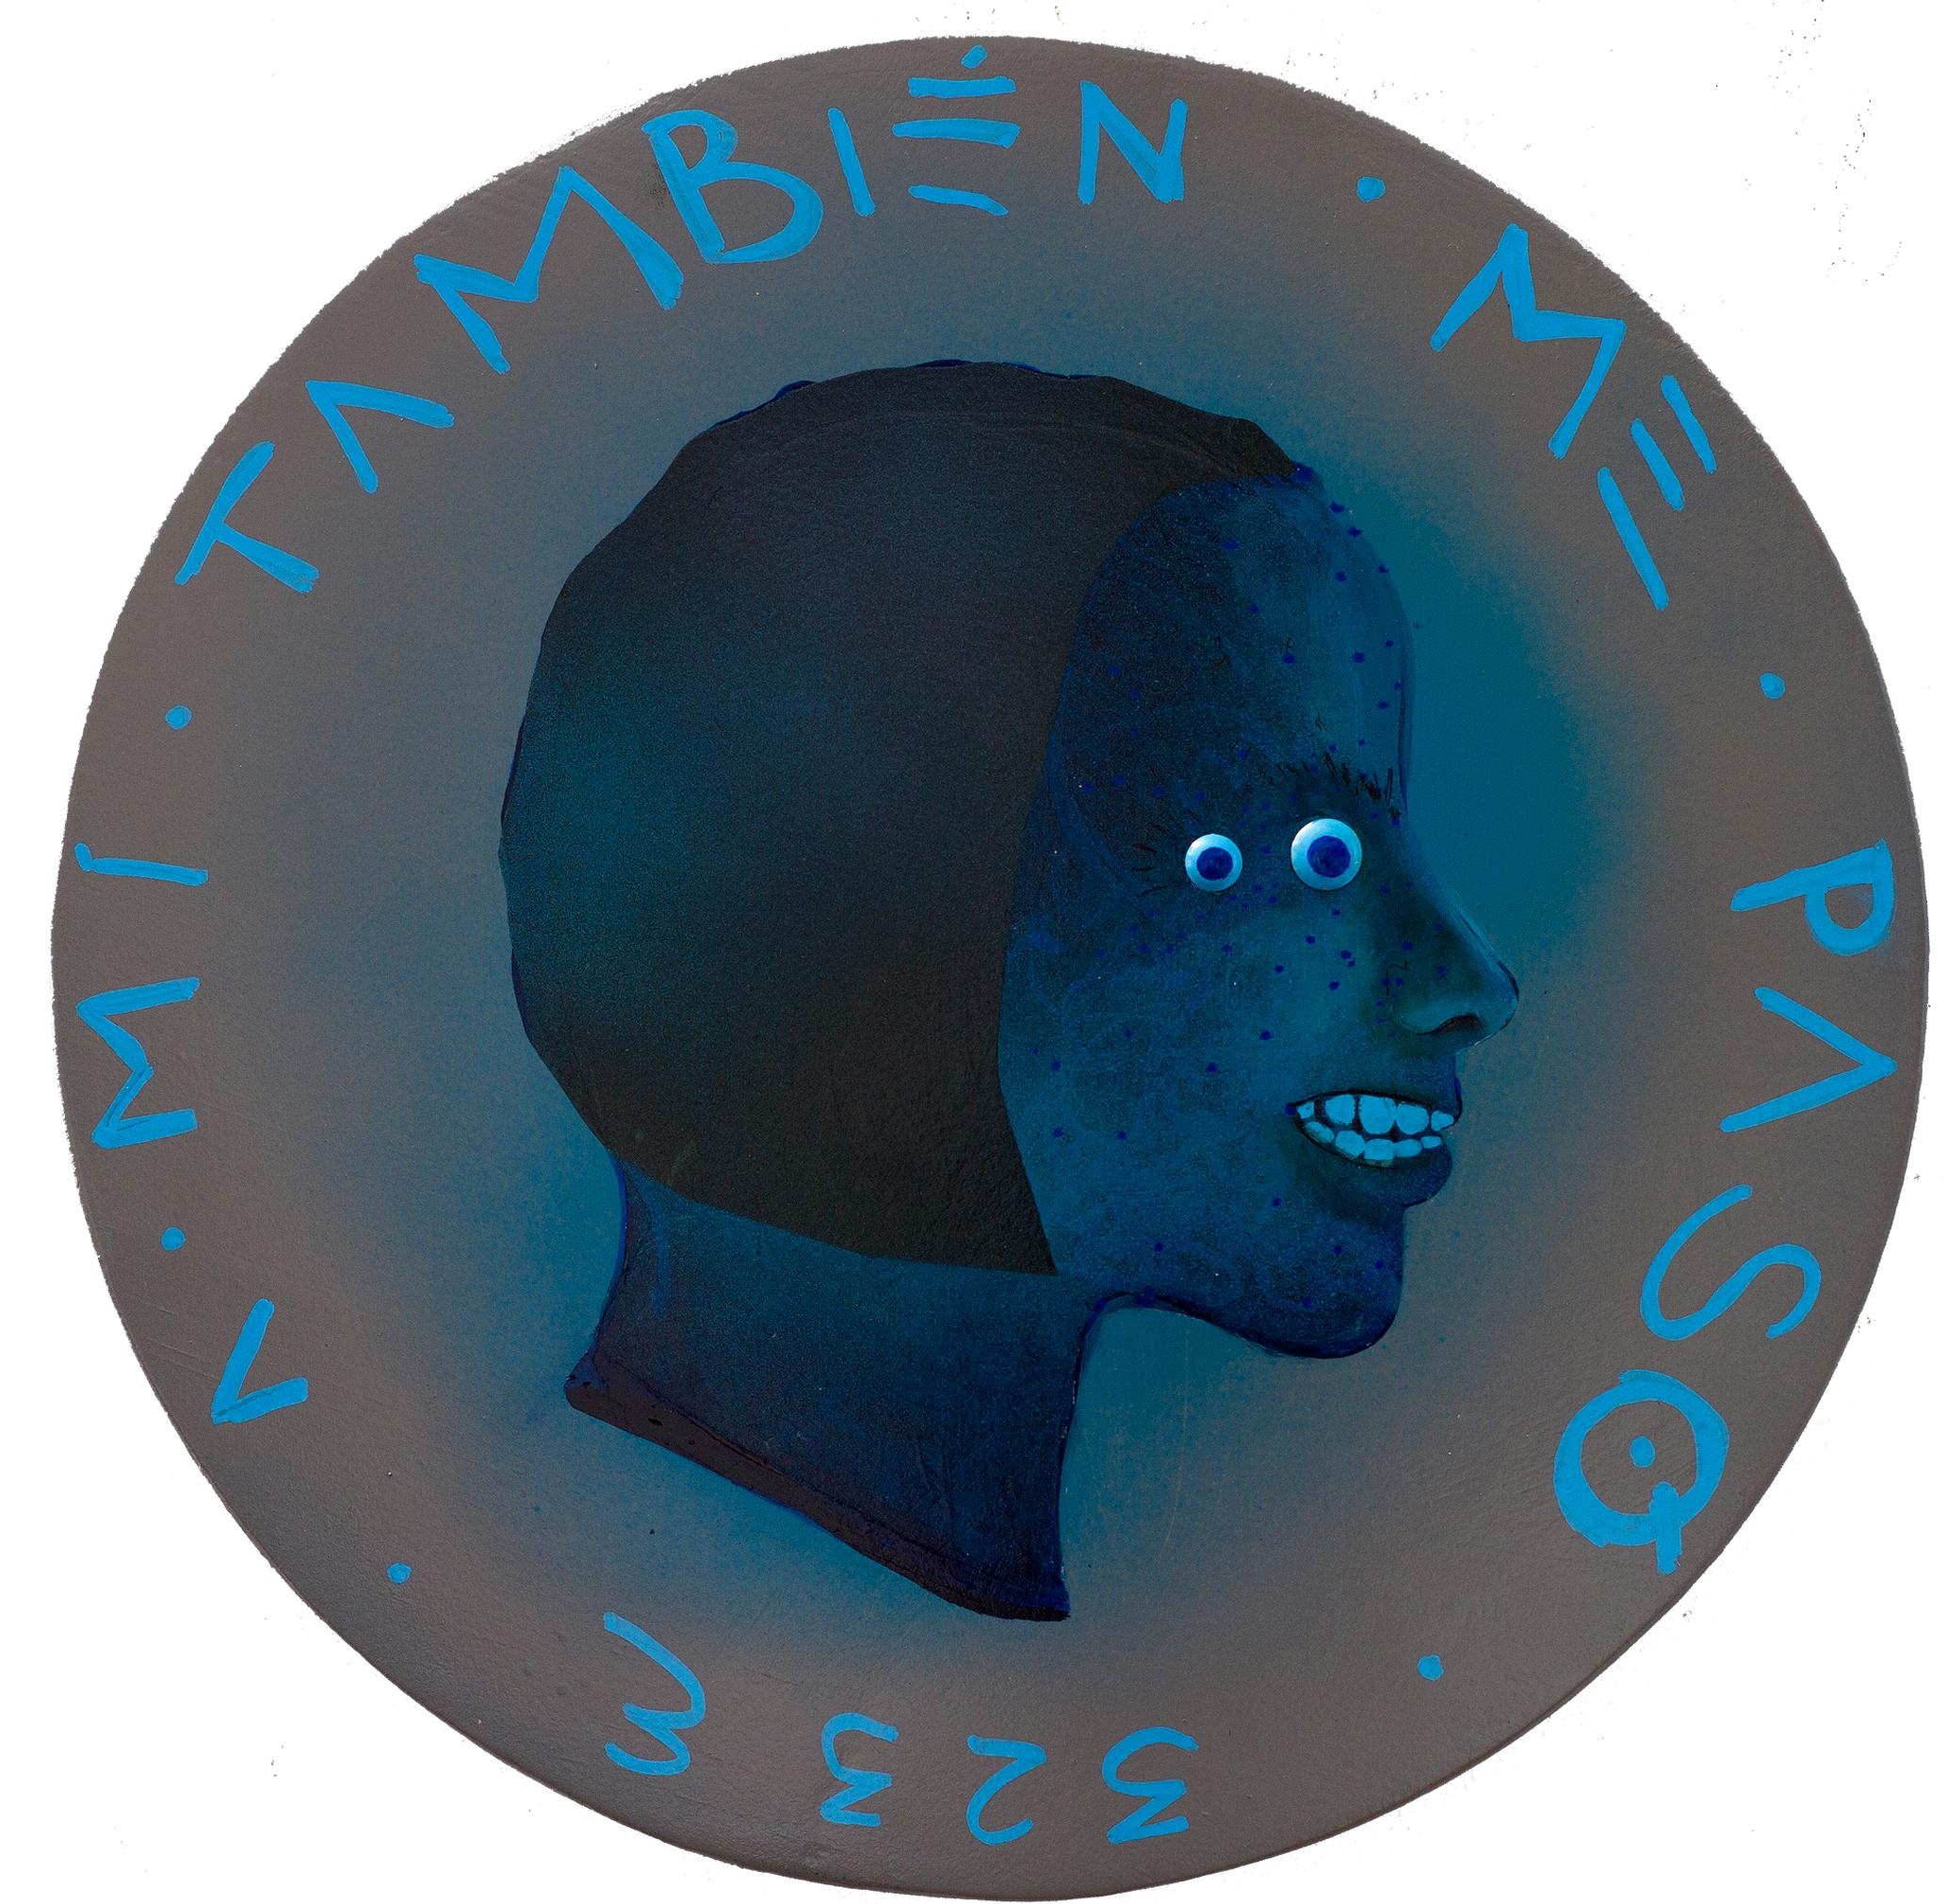 Natasha Lelenco Portrait Painting - Contemporary Portrait On Wooden Coin. Feminist Migrant. Me too. "Currency #208"